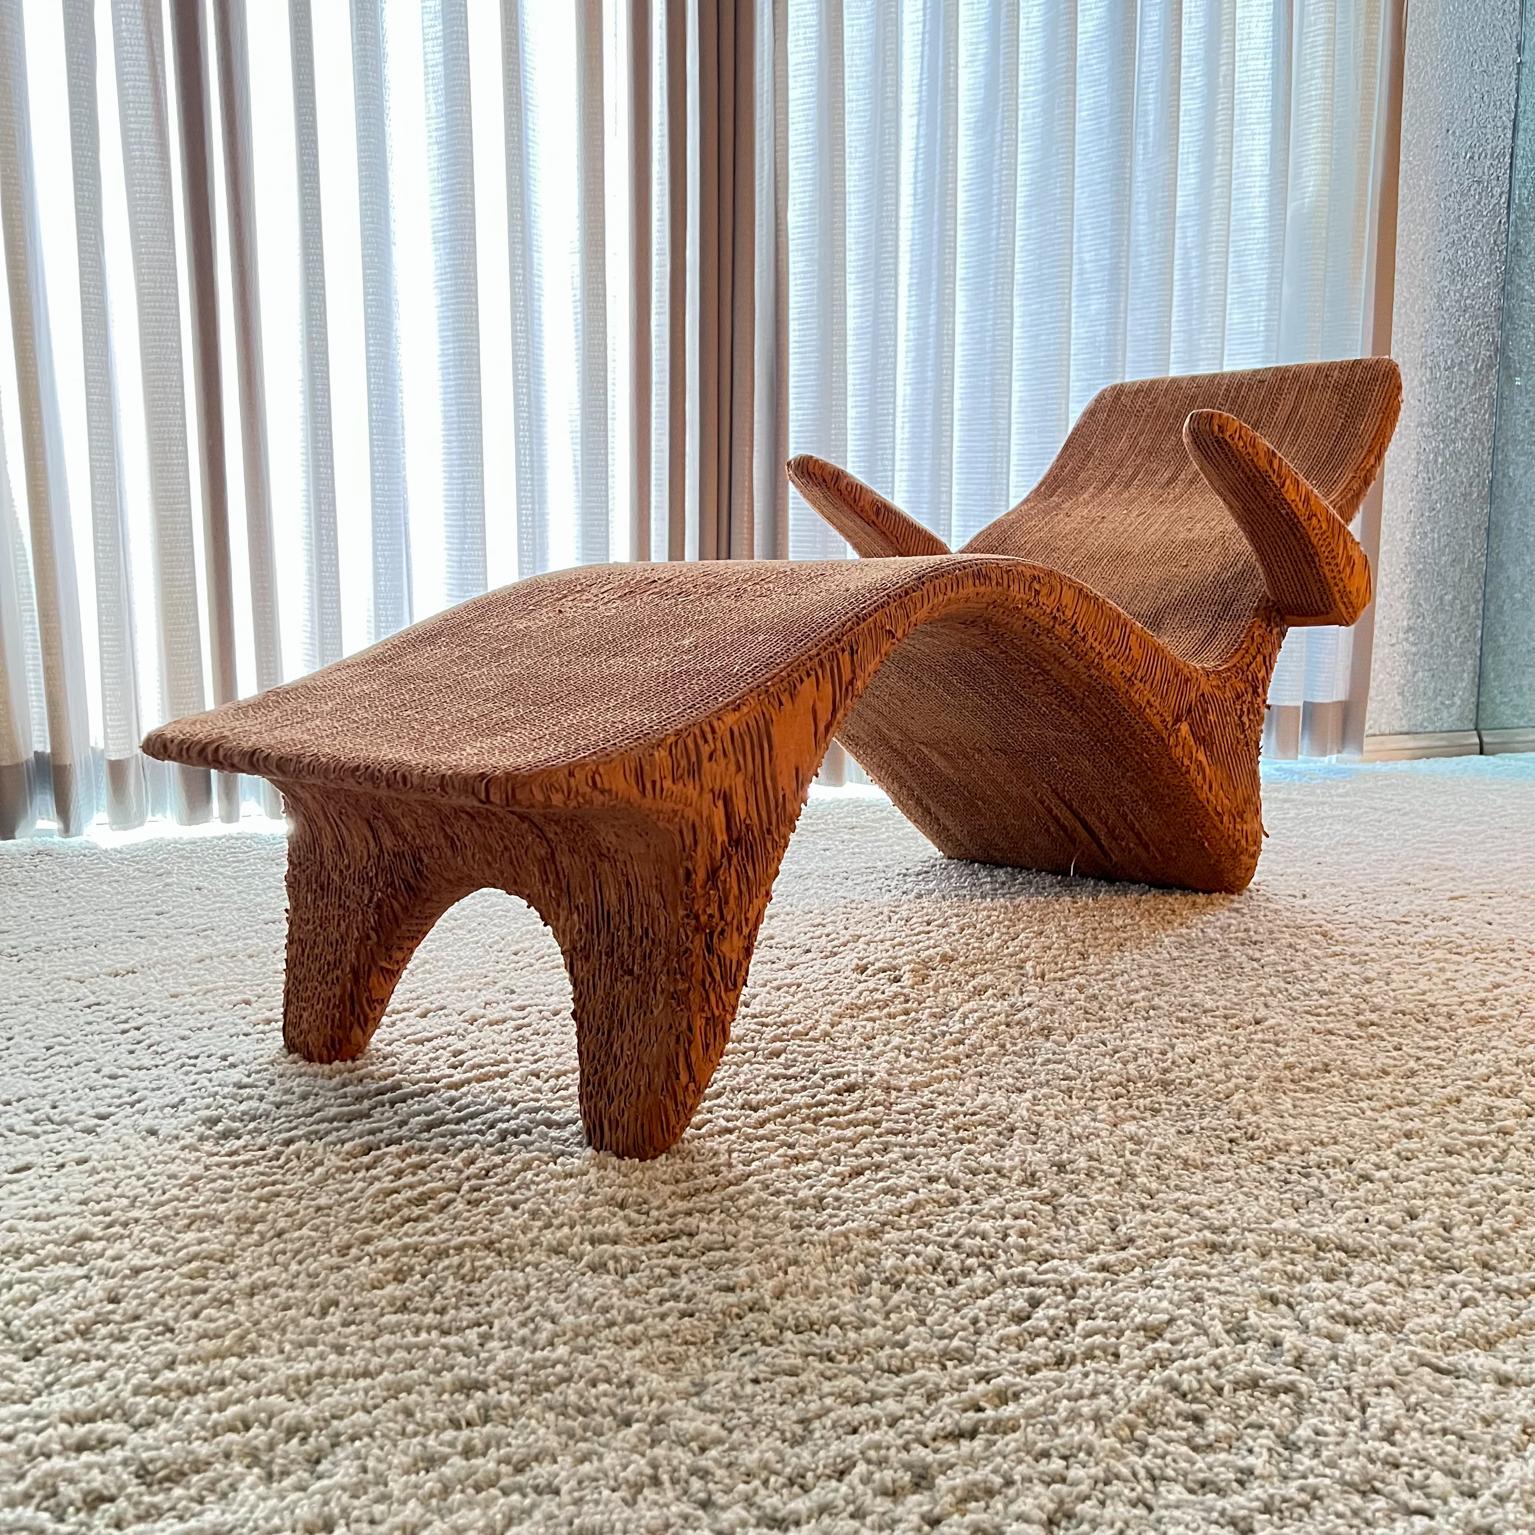  1970s Chaise Lounge LA Art Chair Style of Frank Gehry  For Sale 6